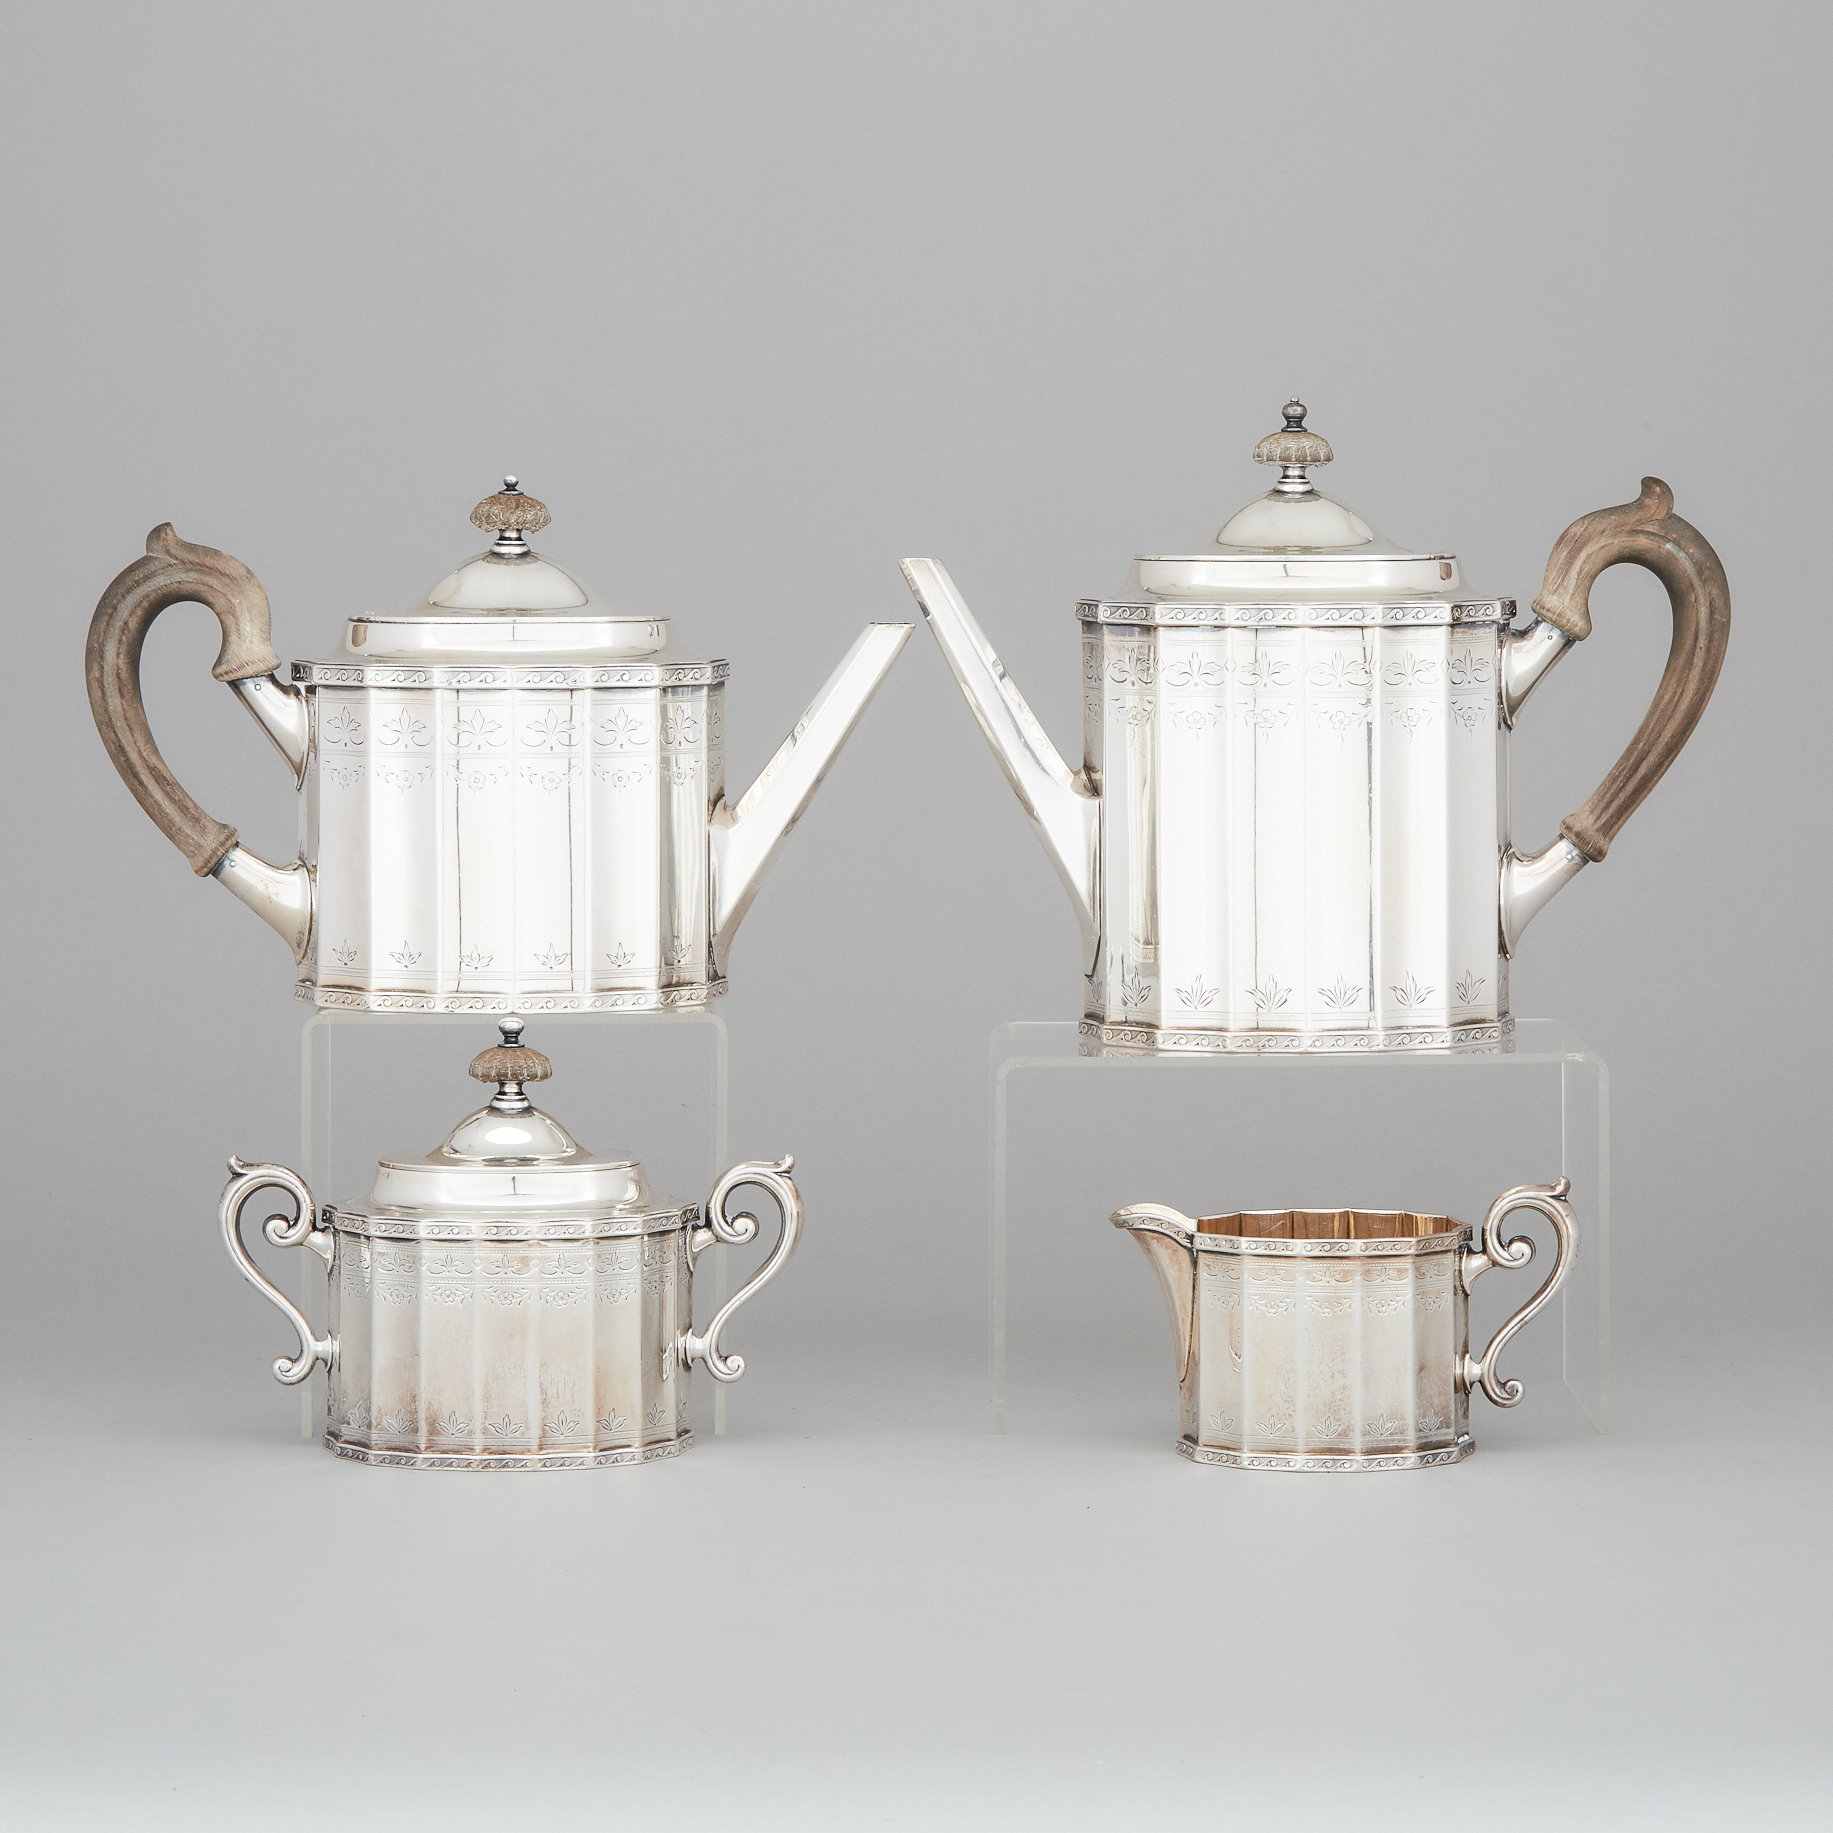 American Silver Tea and Coffee Service, Gorham Mfg. Co., Providence, R.I., 1910